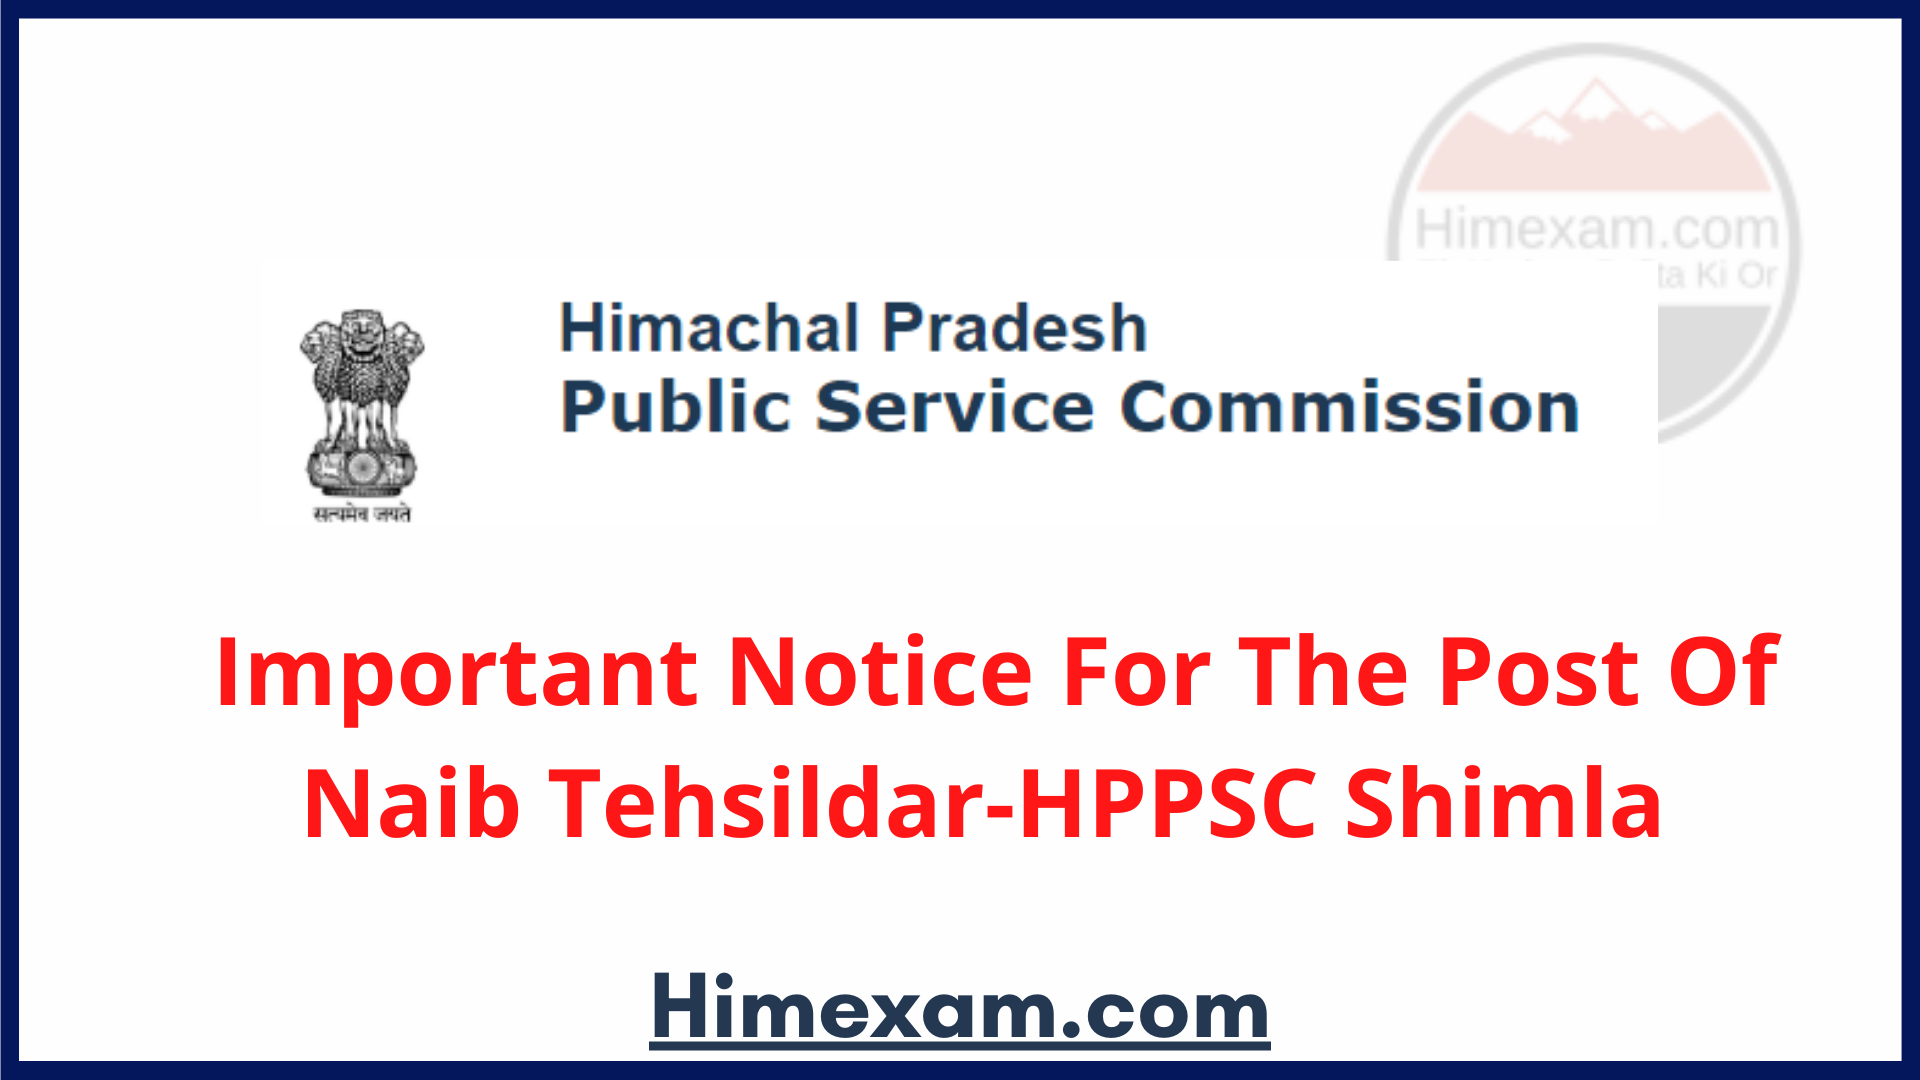 Important Notice For The Post Of Naib Tehsildar-HPPSC Shimla